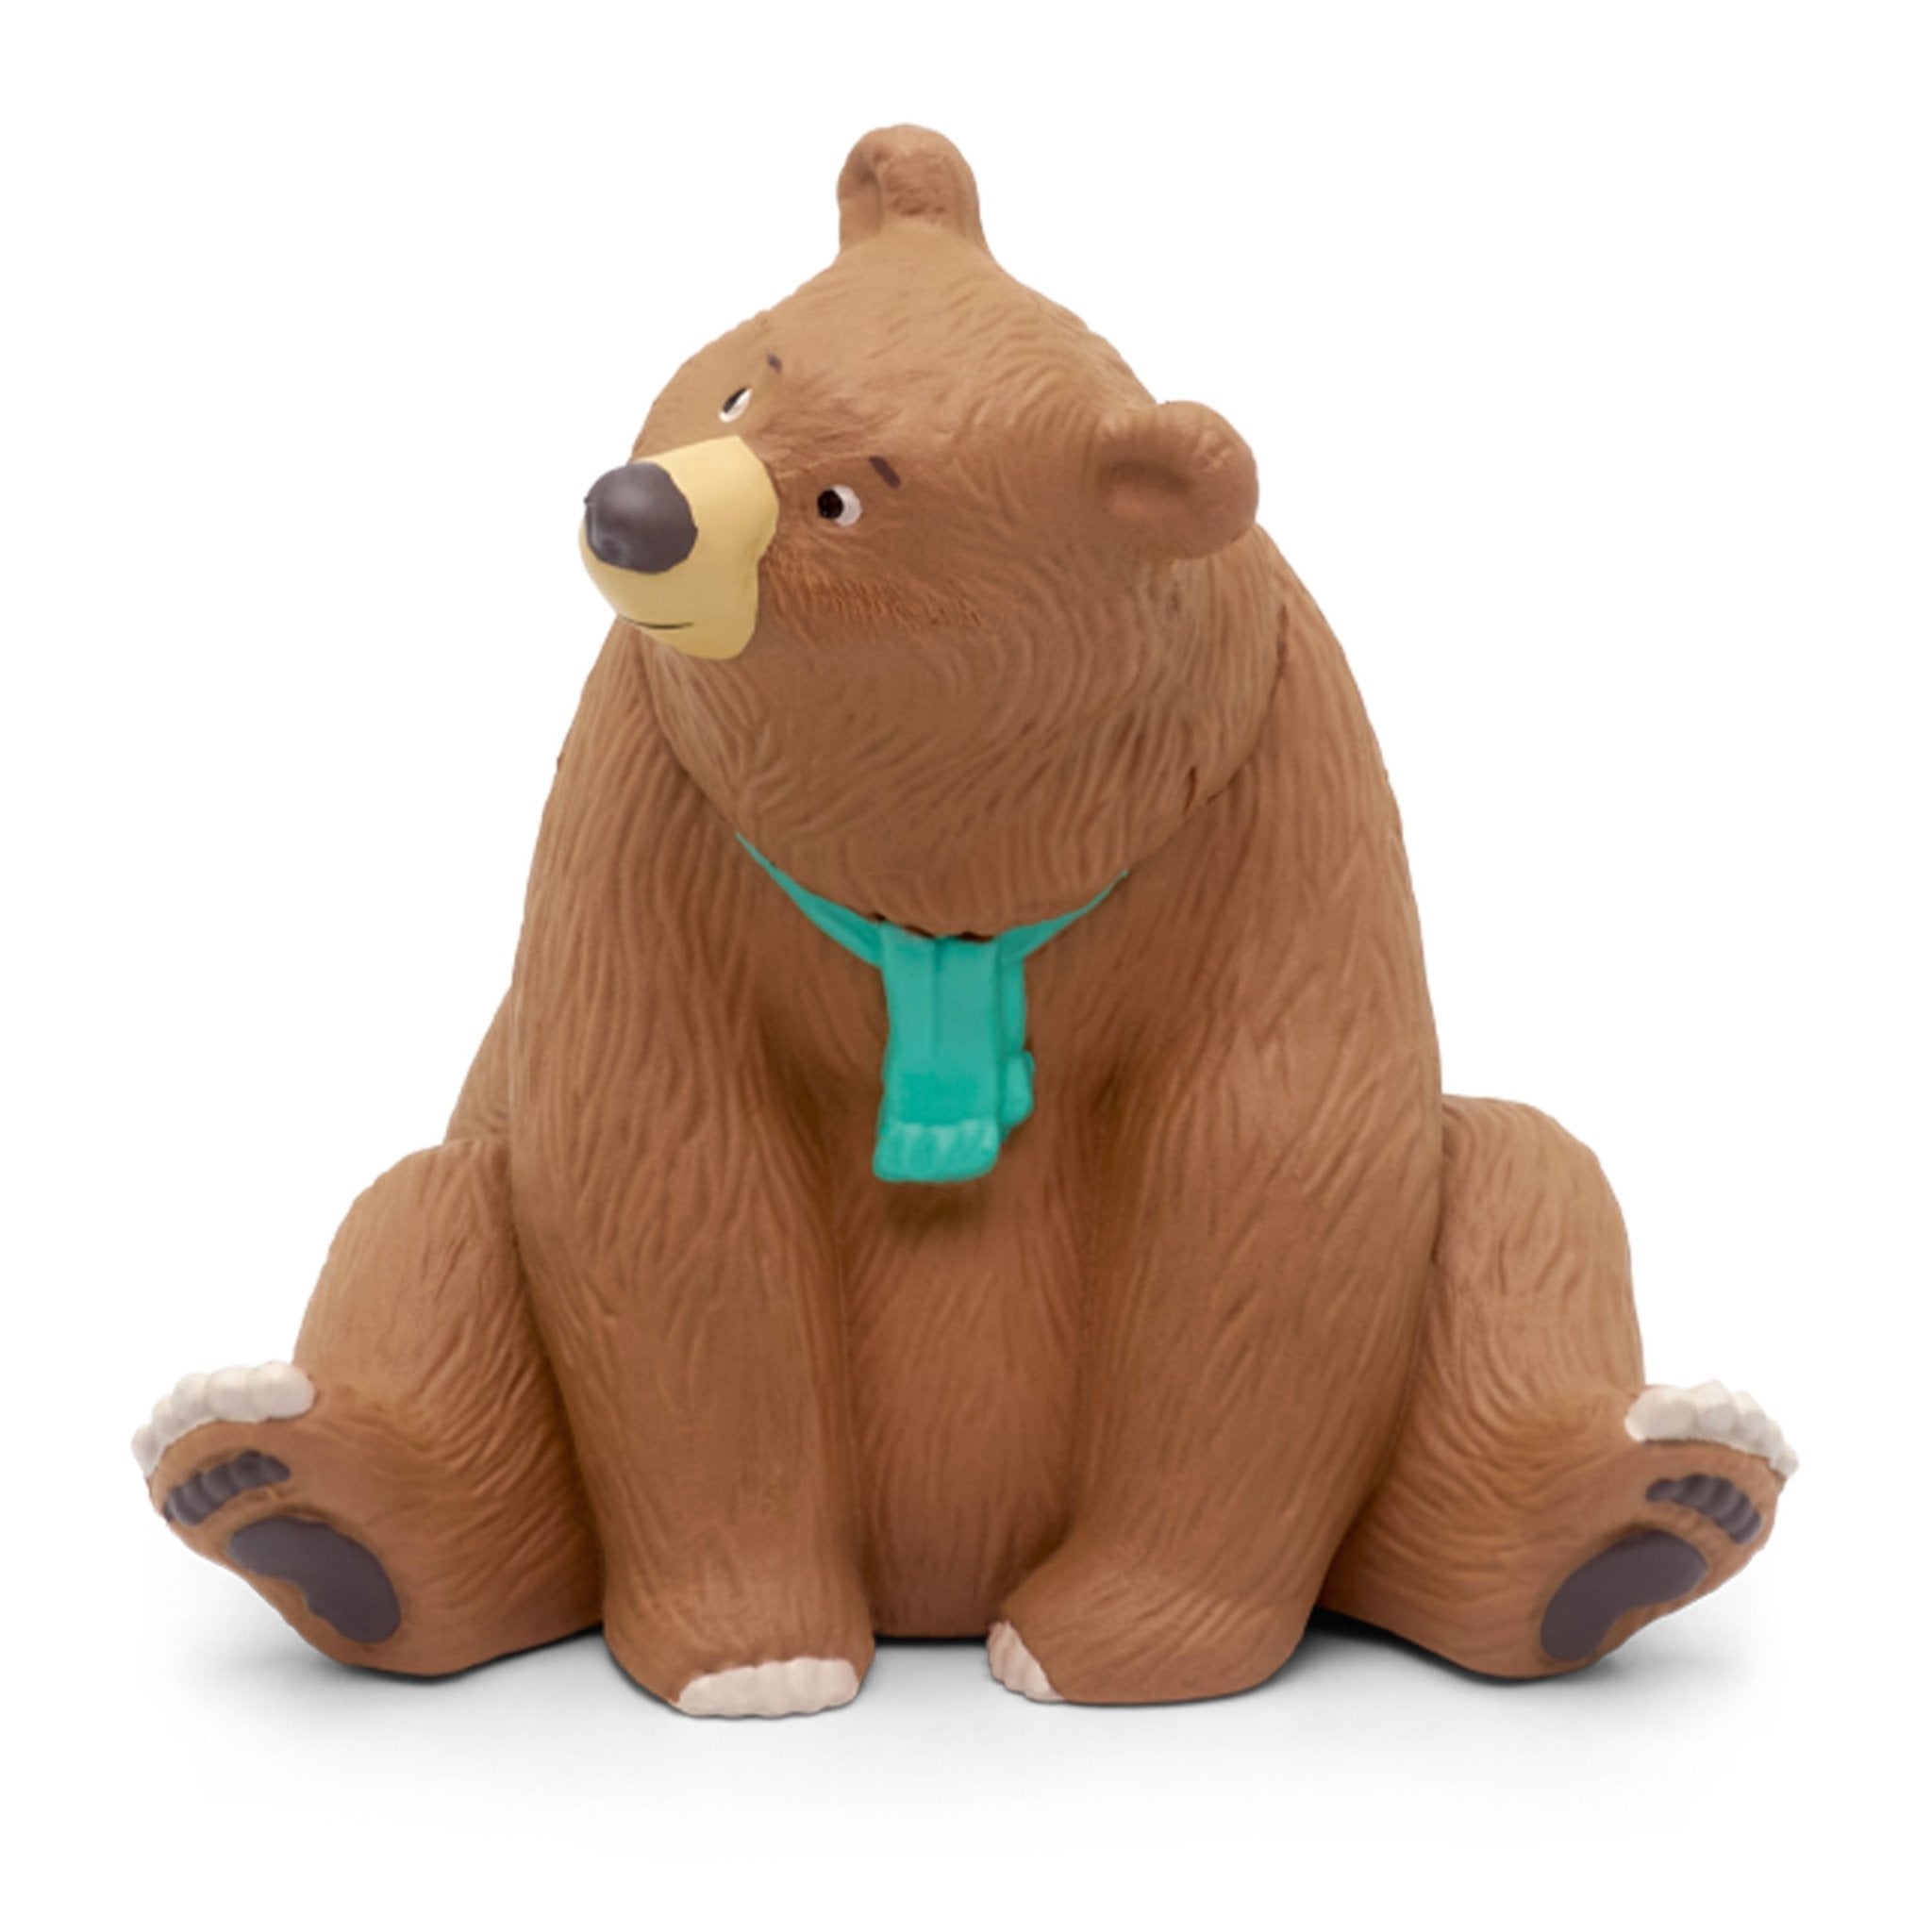 Tonies We're Going on a Bear Hunt Audio Play Figurine - ANB Baby -8401474069413+ years